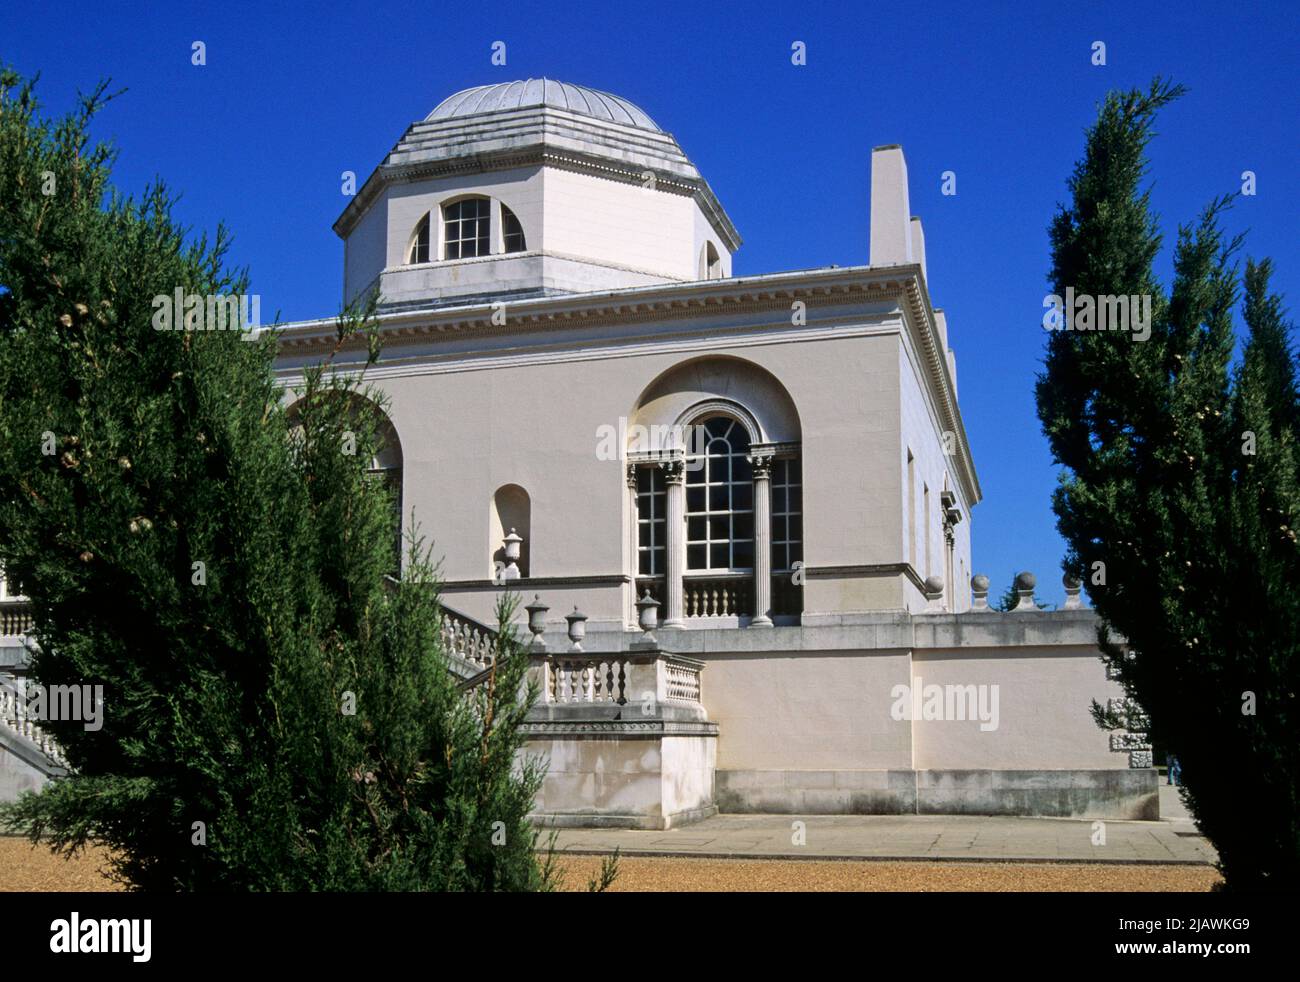 Chiswick House and gardens, a Palladian style villa in Chiswick, London, UK Stock Photo